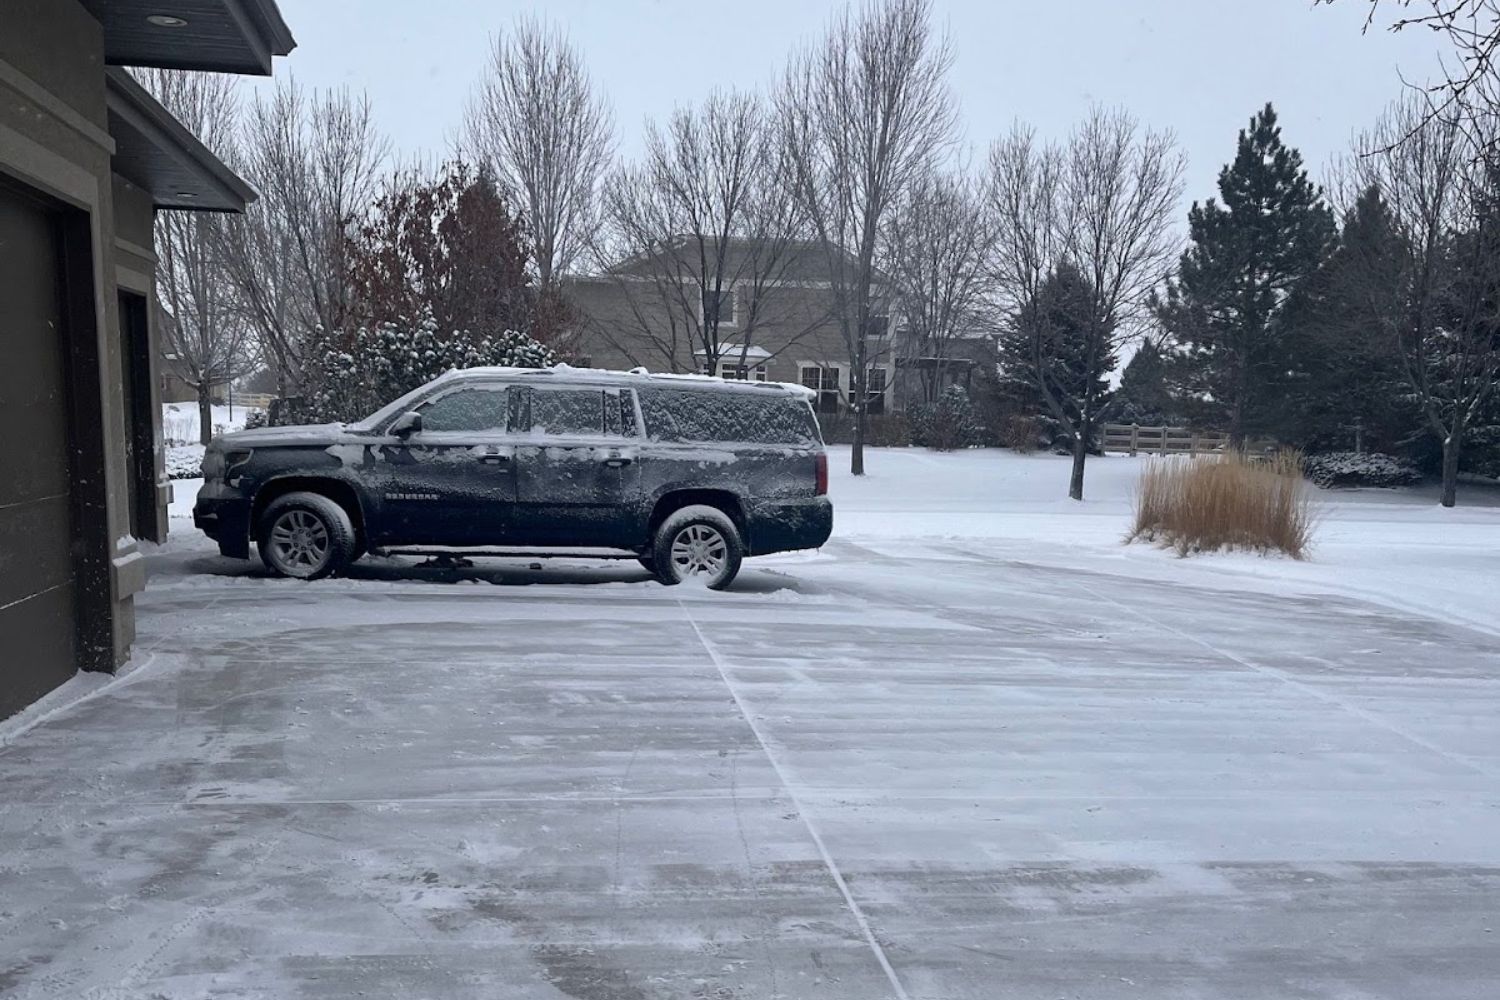 A snow-covered SUV parked at the far end of a driveway that has been mostly cleared using the Ego lightweight snow blower.